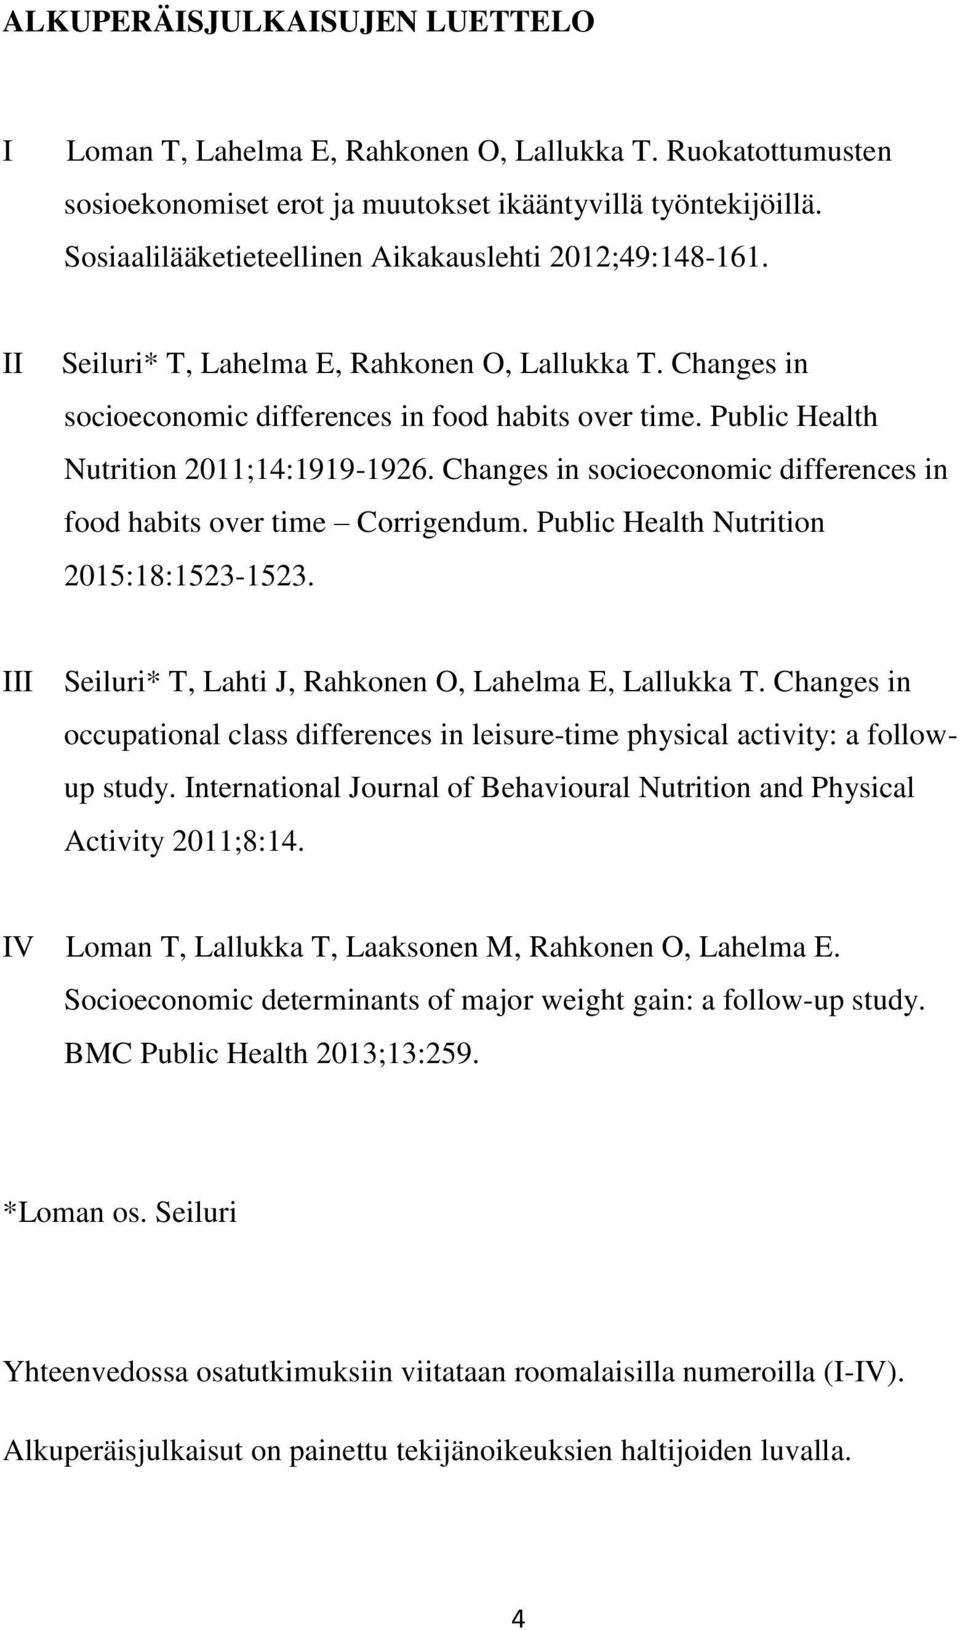 Public Health Nutrition 2011;14:1919-1926. Changes in socioeconomic differences in food habits over time Corrigendum. Public Health Nutrition 2015:18:1523-1523.